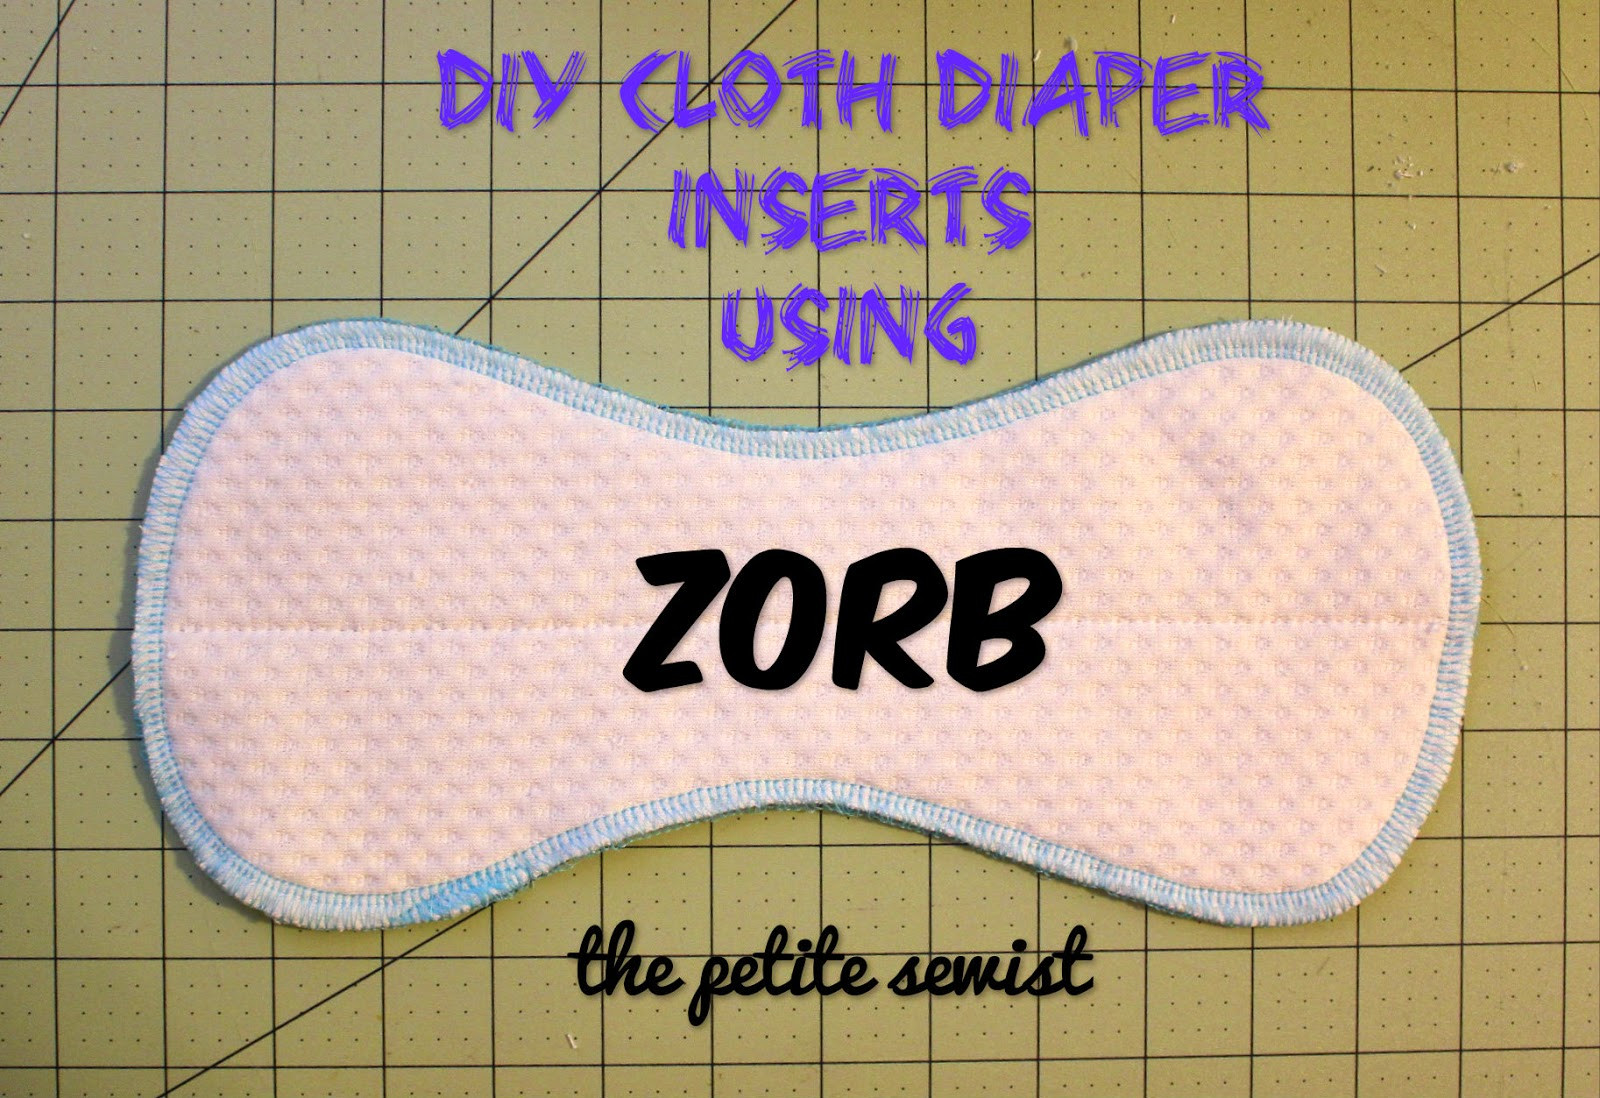 Best ideas about DIY Cloth Diapers
. Save or Pin The Petite Sewist DIY Cloth Diaper Inserts [Using Zorb] Now.